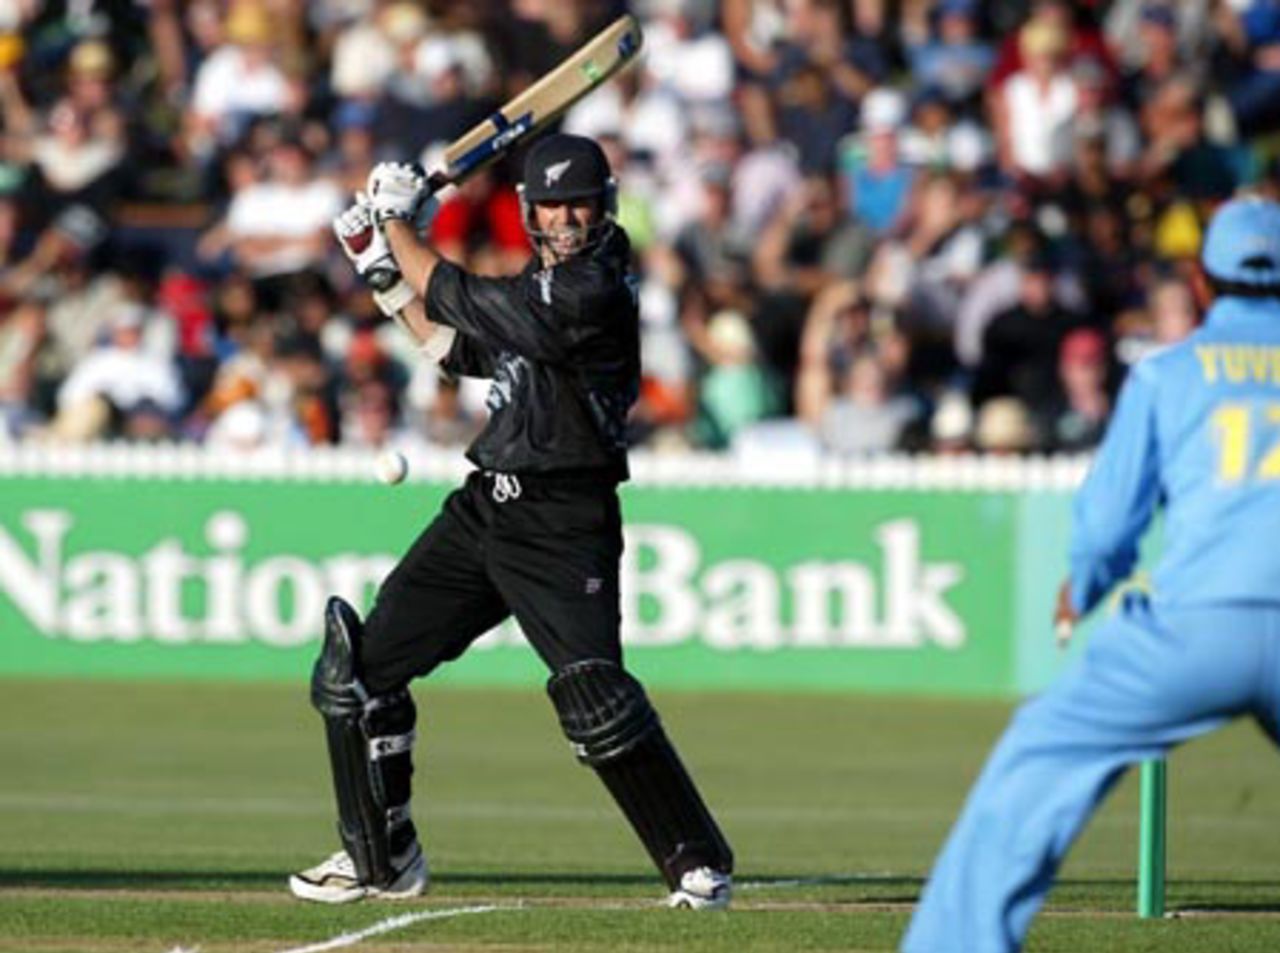 New Zealand batsman Stephen Fleming cuts a delivery through backward point during his innings of 60 not out. Indian fielder Yuvraj Singh looks on. 7th ODI: New Zealand v India at Westpac Park, Hamilton, 14 January 2003.